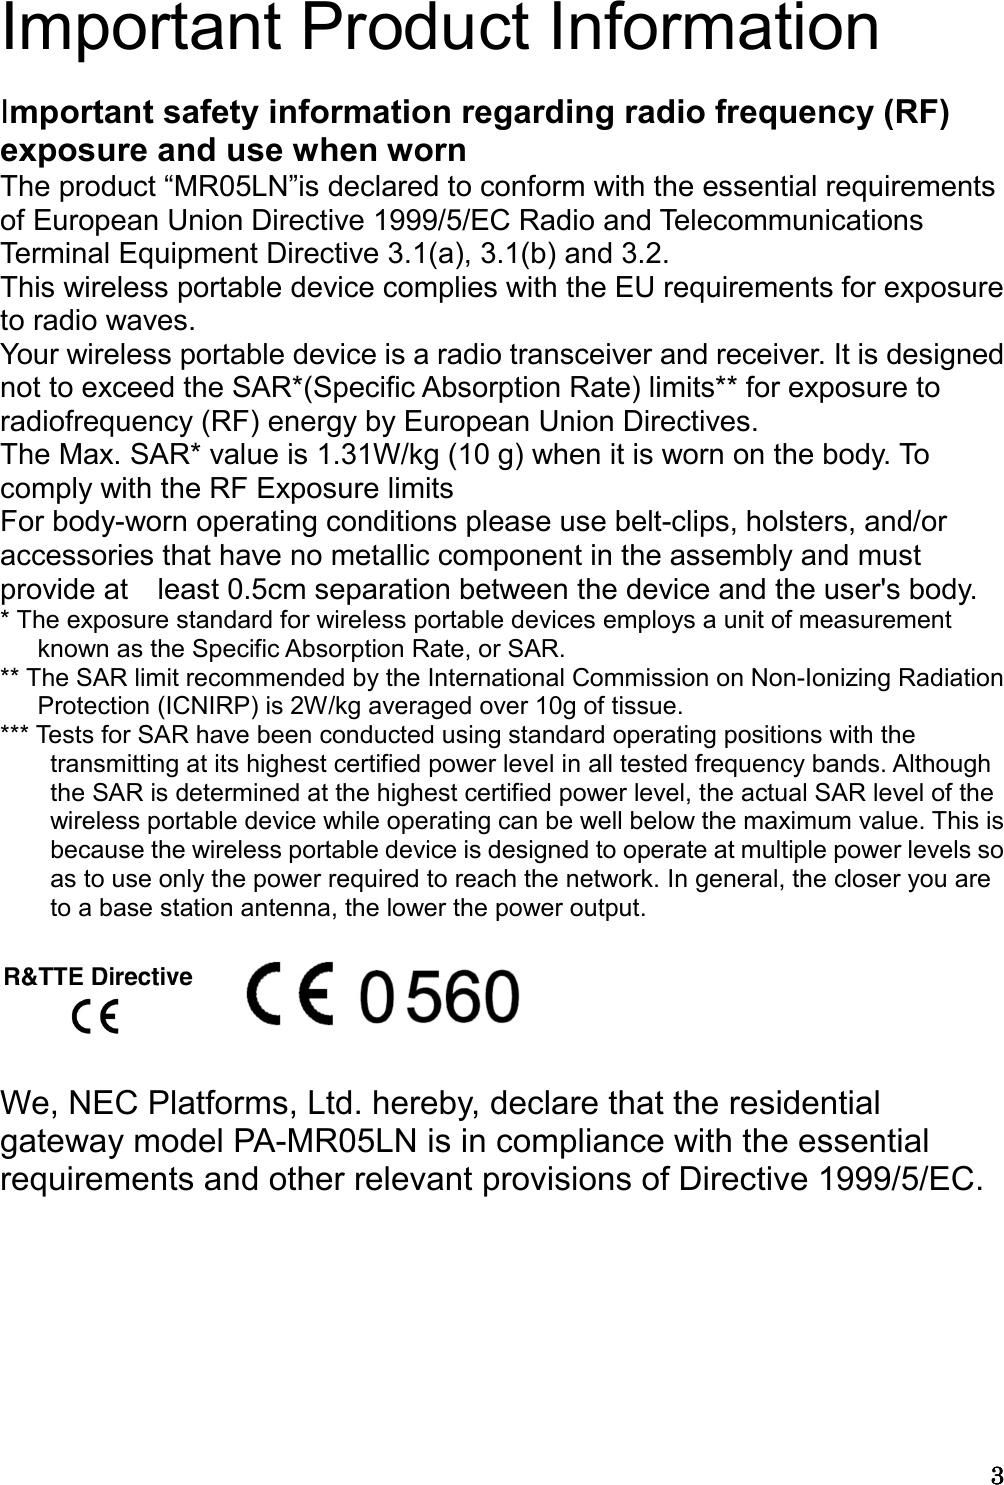 3333  Important Product Information  Important safety information regarding radio frequency (RF) exposure and use when worn The product “MR05LN”is declared to conform with the essential requirements of European Union Directive 1999/5/EC Radio and Telecommunications Terminal Equipment Directive 3.1(a), 3.1(b) and 3.2.   This wireless portable device complies with the EU requirements for exposure to radio waves. Your wireless portable device is a radio transceiver and receiver. It is designed not to exceed the SAR*(Specific Absorption Rate) limits** for exposure to radiofrequency (RF) energy by European Union Directives. The Max. SAR* value is 1.31W/kg (10 g) when it is worn on the body. To comply with the RF Exposure limits For body-worn operating conditions please use belt-clips, holsters, and/or   accessories that have no metallic component in the assembly and must provide at    least 0.5cm separation between the device and the user&apos;s body. * The exposure standard for wireless portable devices employs a unit of measurement known as the Specific Absorption Rate, or SAR.   ** The SAR limit recommended by the International Commission on Non-Ionizing Radiation Protection (ICNIRP) is 2W/kg averaged over 10g of tissue.   *** Tests for SAR have been conducted using standard operating positions with the transmitting at its highest certified power level in all tested frequency bands. Although the SAR is determined at the highest certified power level, the actual SAR level of the wireless portable device while operating can be well below the maximum value. This is because the wireless portable device is designed to operate at multiple power levels so as to use only the power required to reach the network. In general, the closer you are to a base station antenna, the lower the power output.       We, NEC Platforms, Ltd. hereby, declare that the residential gateway model PA-MR05LN is in compliance with the essential requirements and other relevant provisions of Directive 1999/5/EC.       